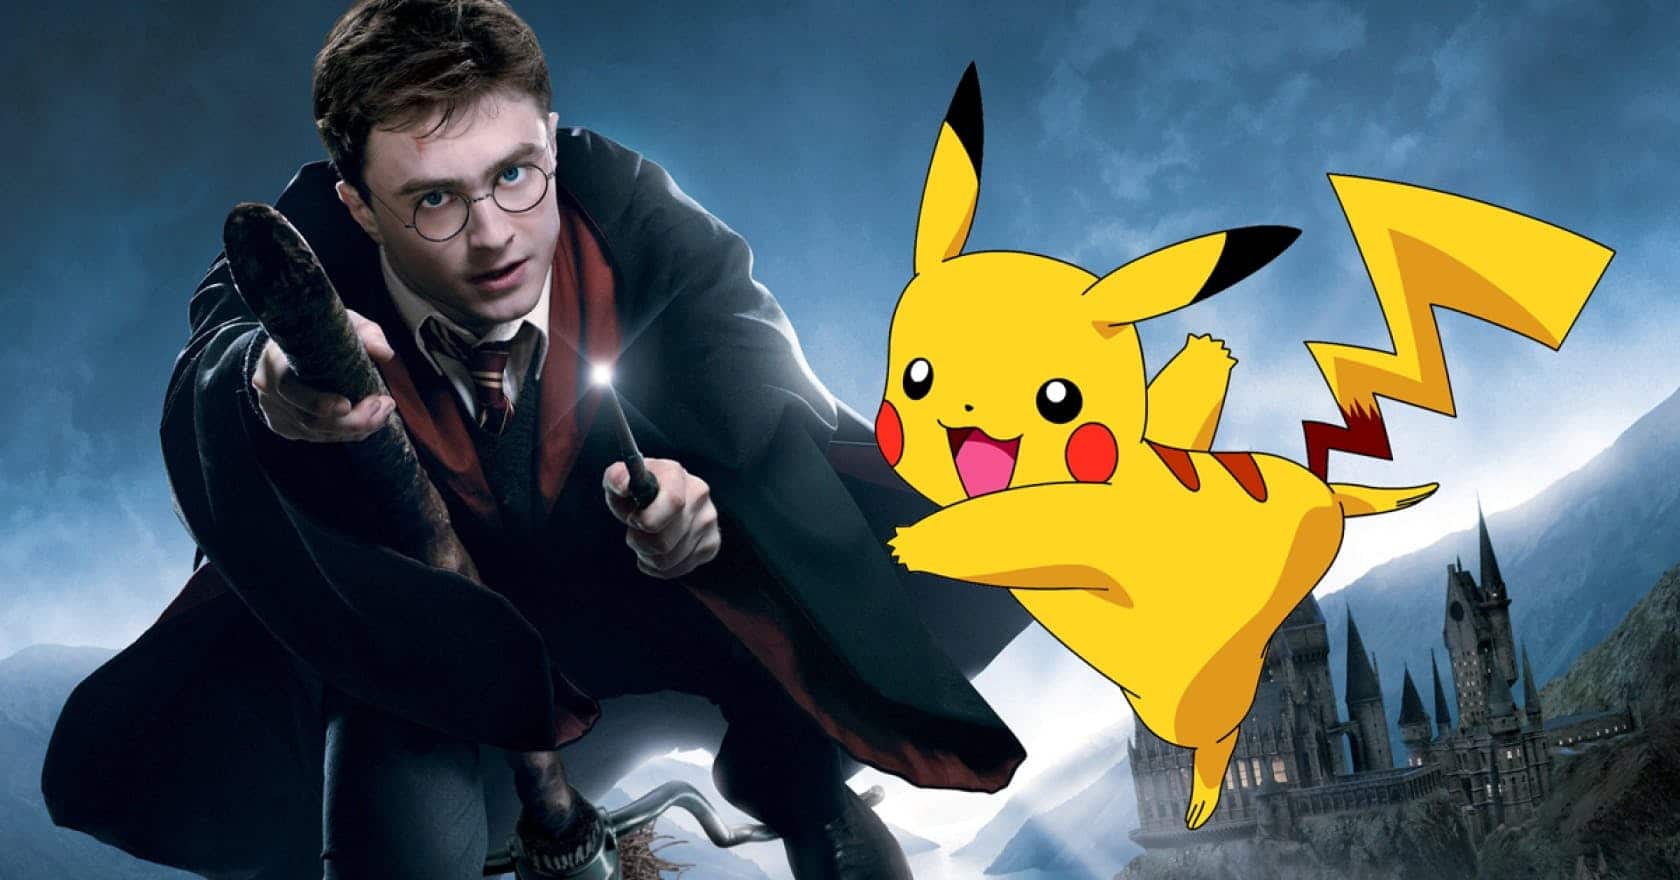 Theres going to be a Harry Potter Pokémon Go game